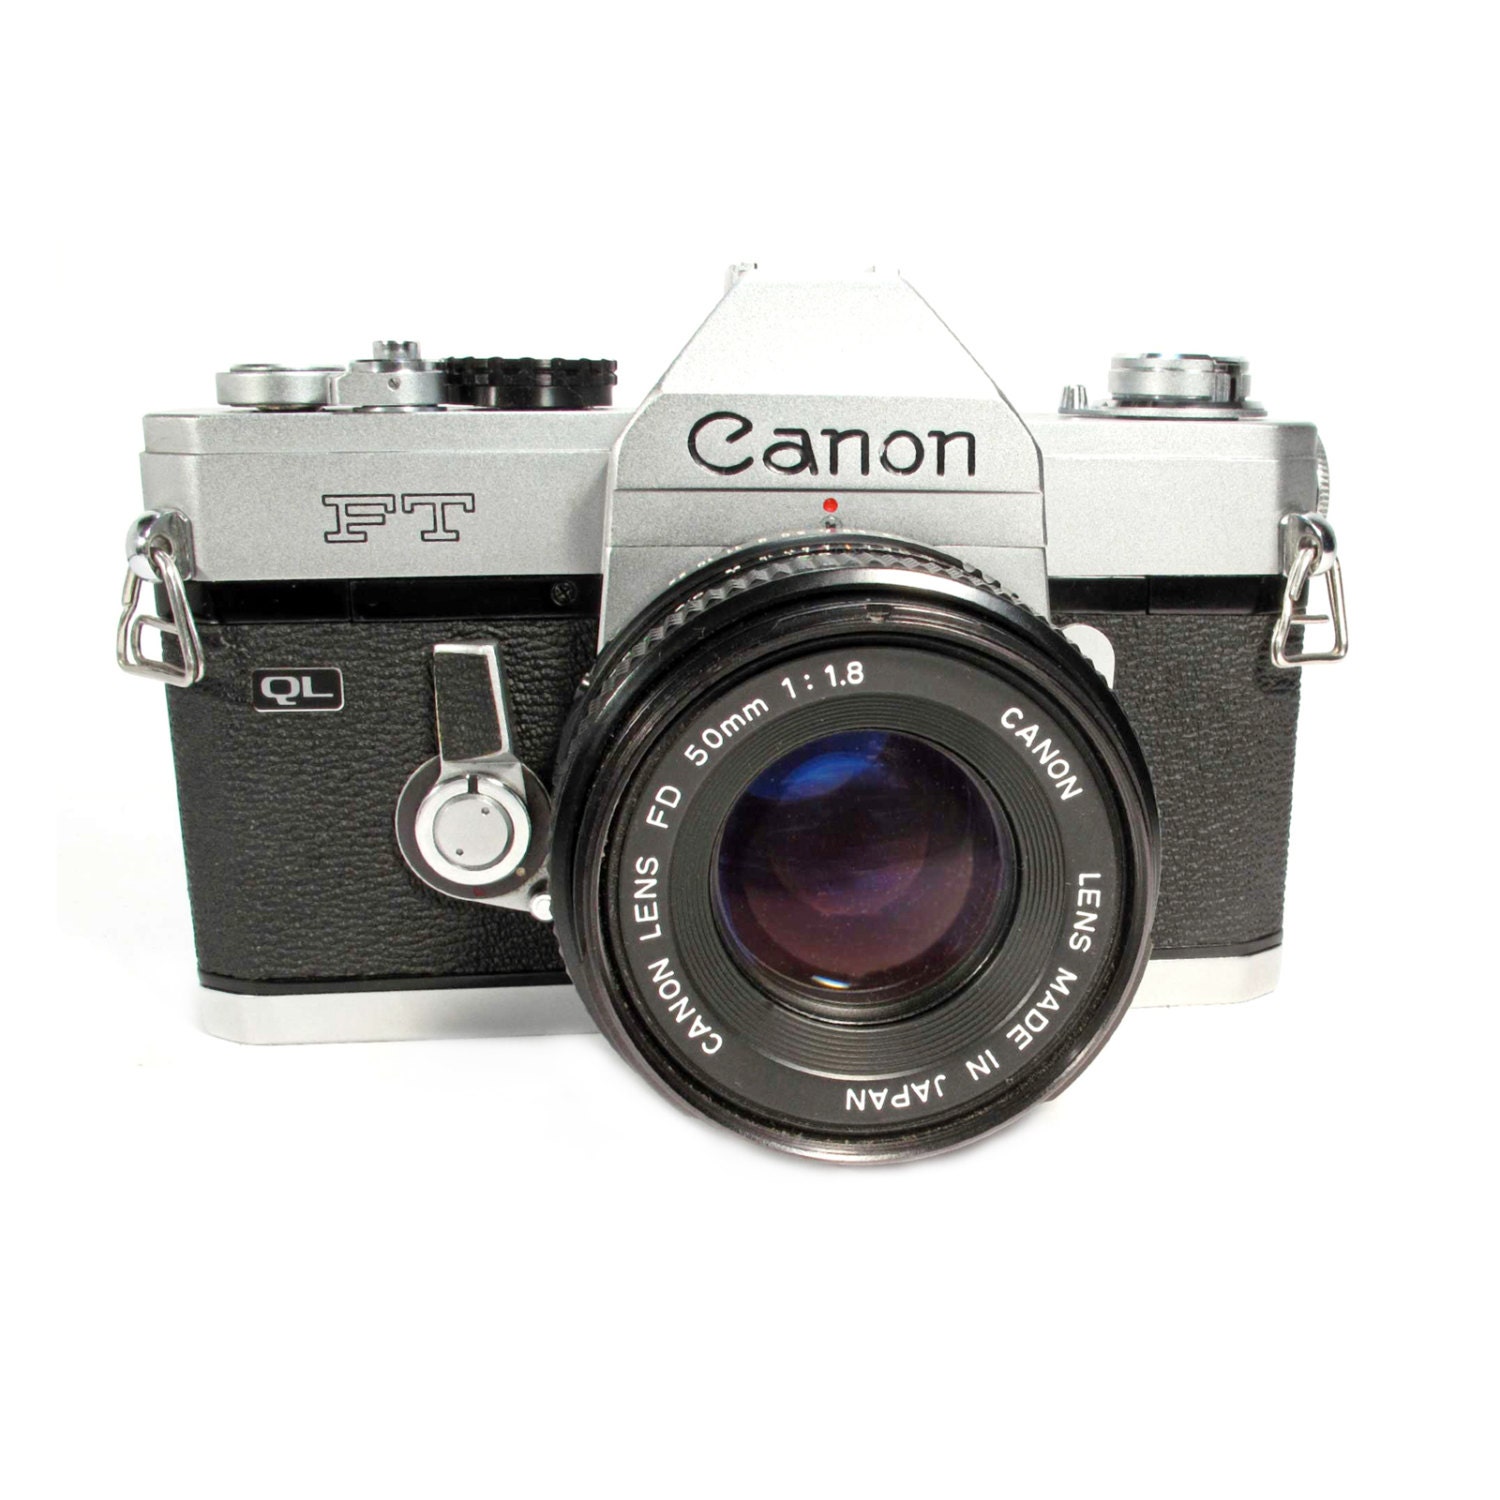 Canon FT QL SLR 35 mm camera. First canon with TTl 